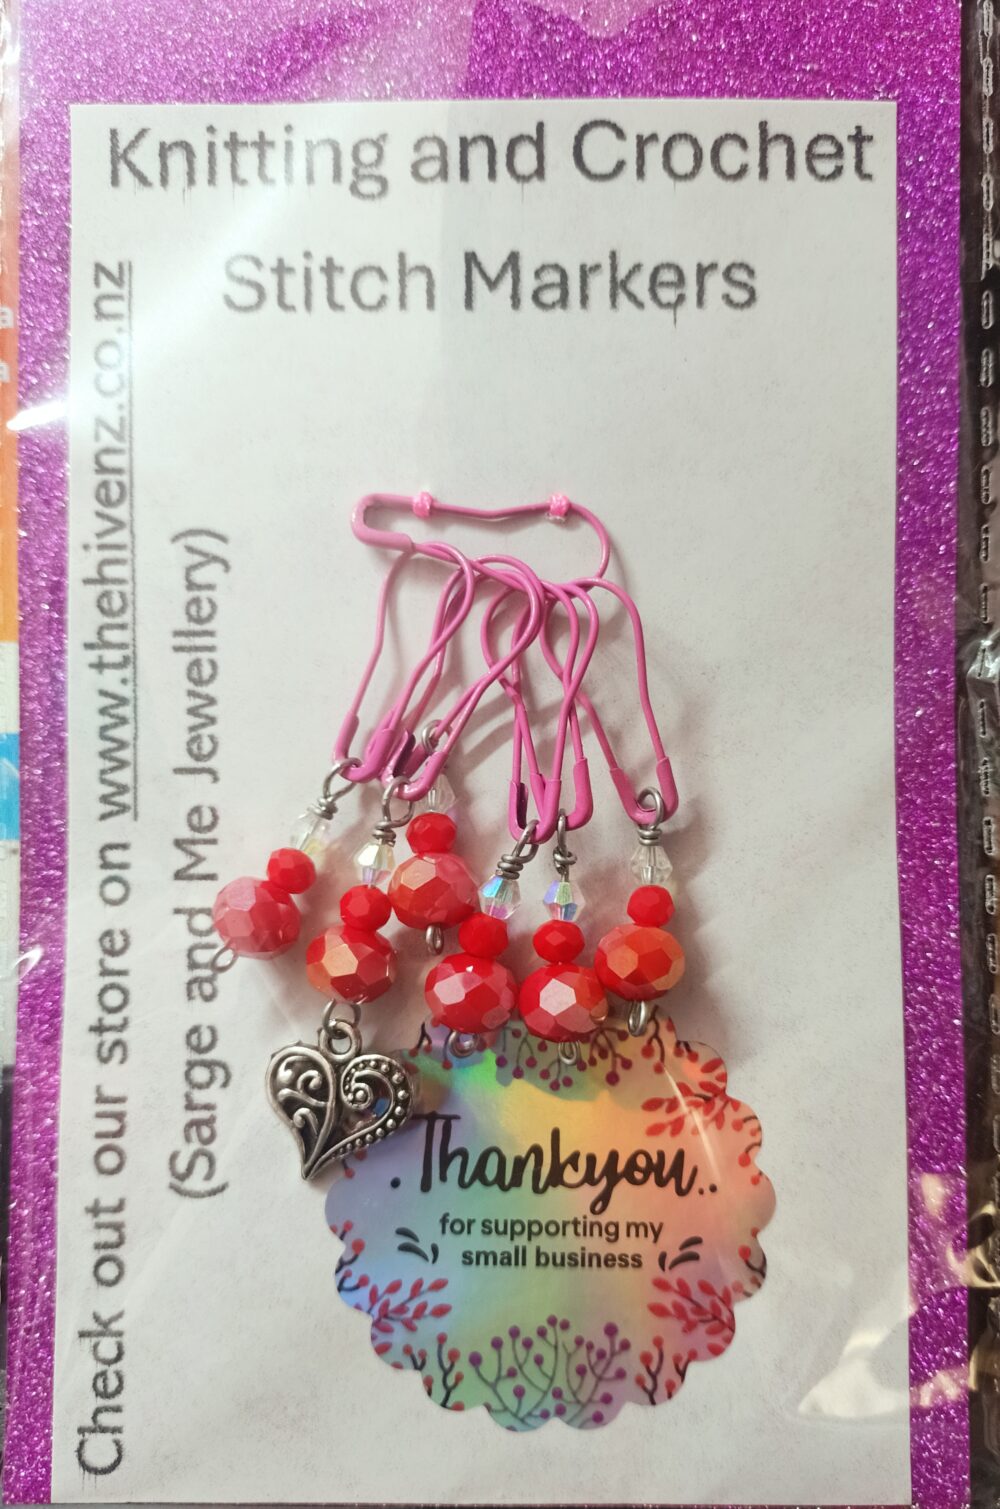 red knitting or crochet stitch markers